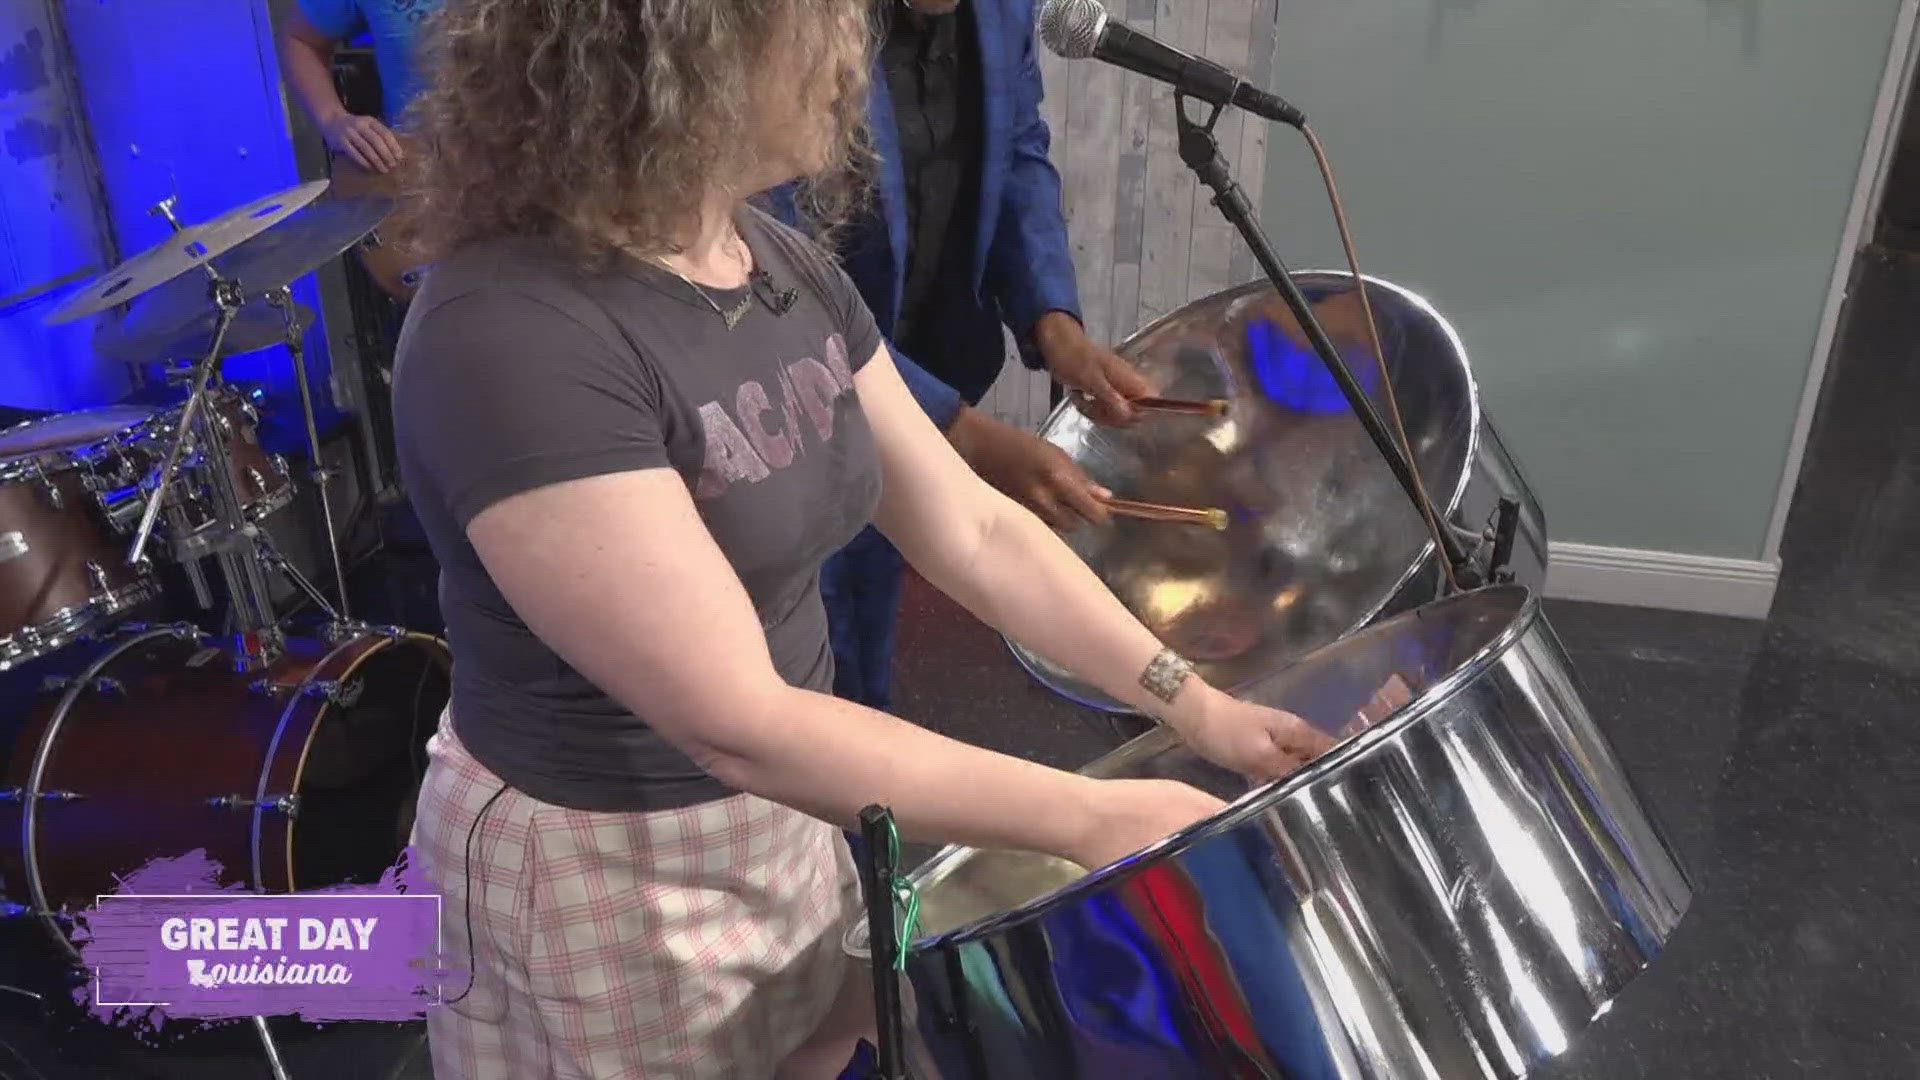 Daria Dzurik of Daria & The Hip Drops shows us how to play the steel drums and performs another song.